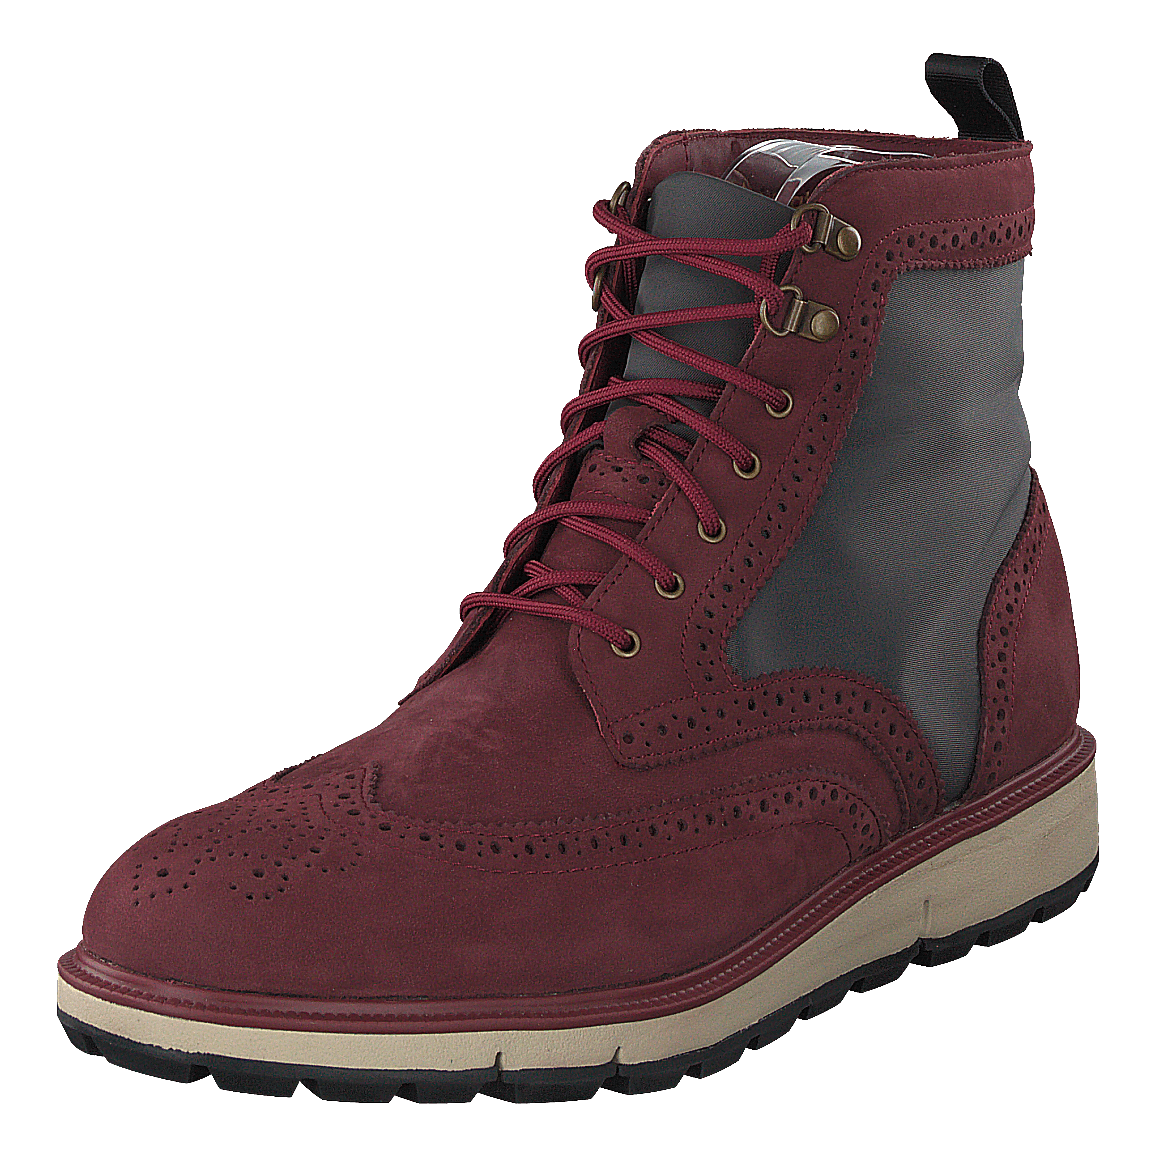 Motion Wing Tip Boot Cabernet/gray/black